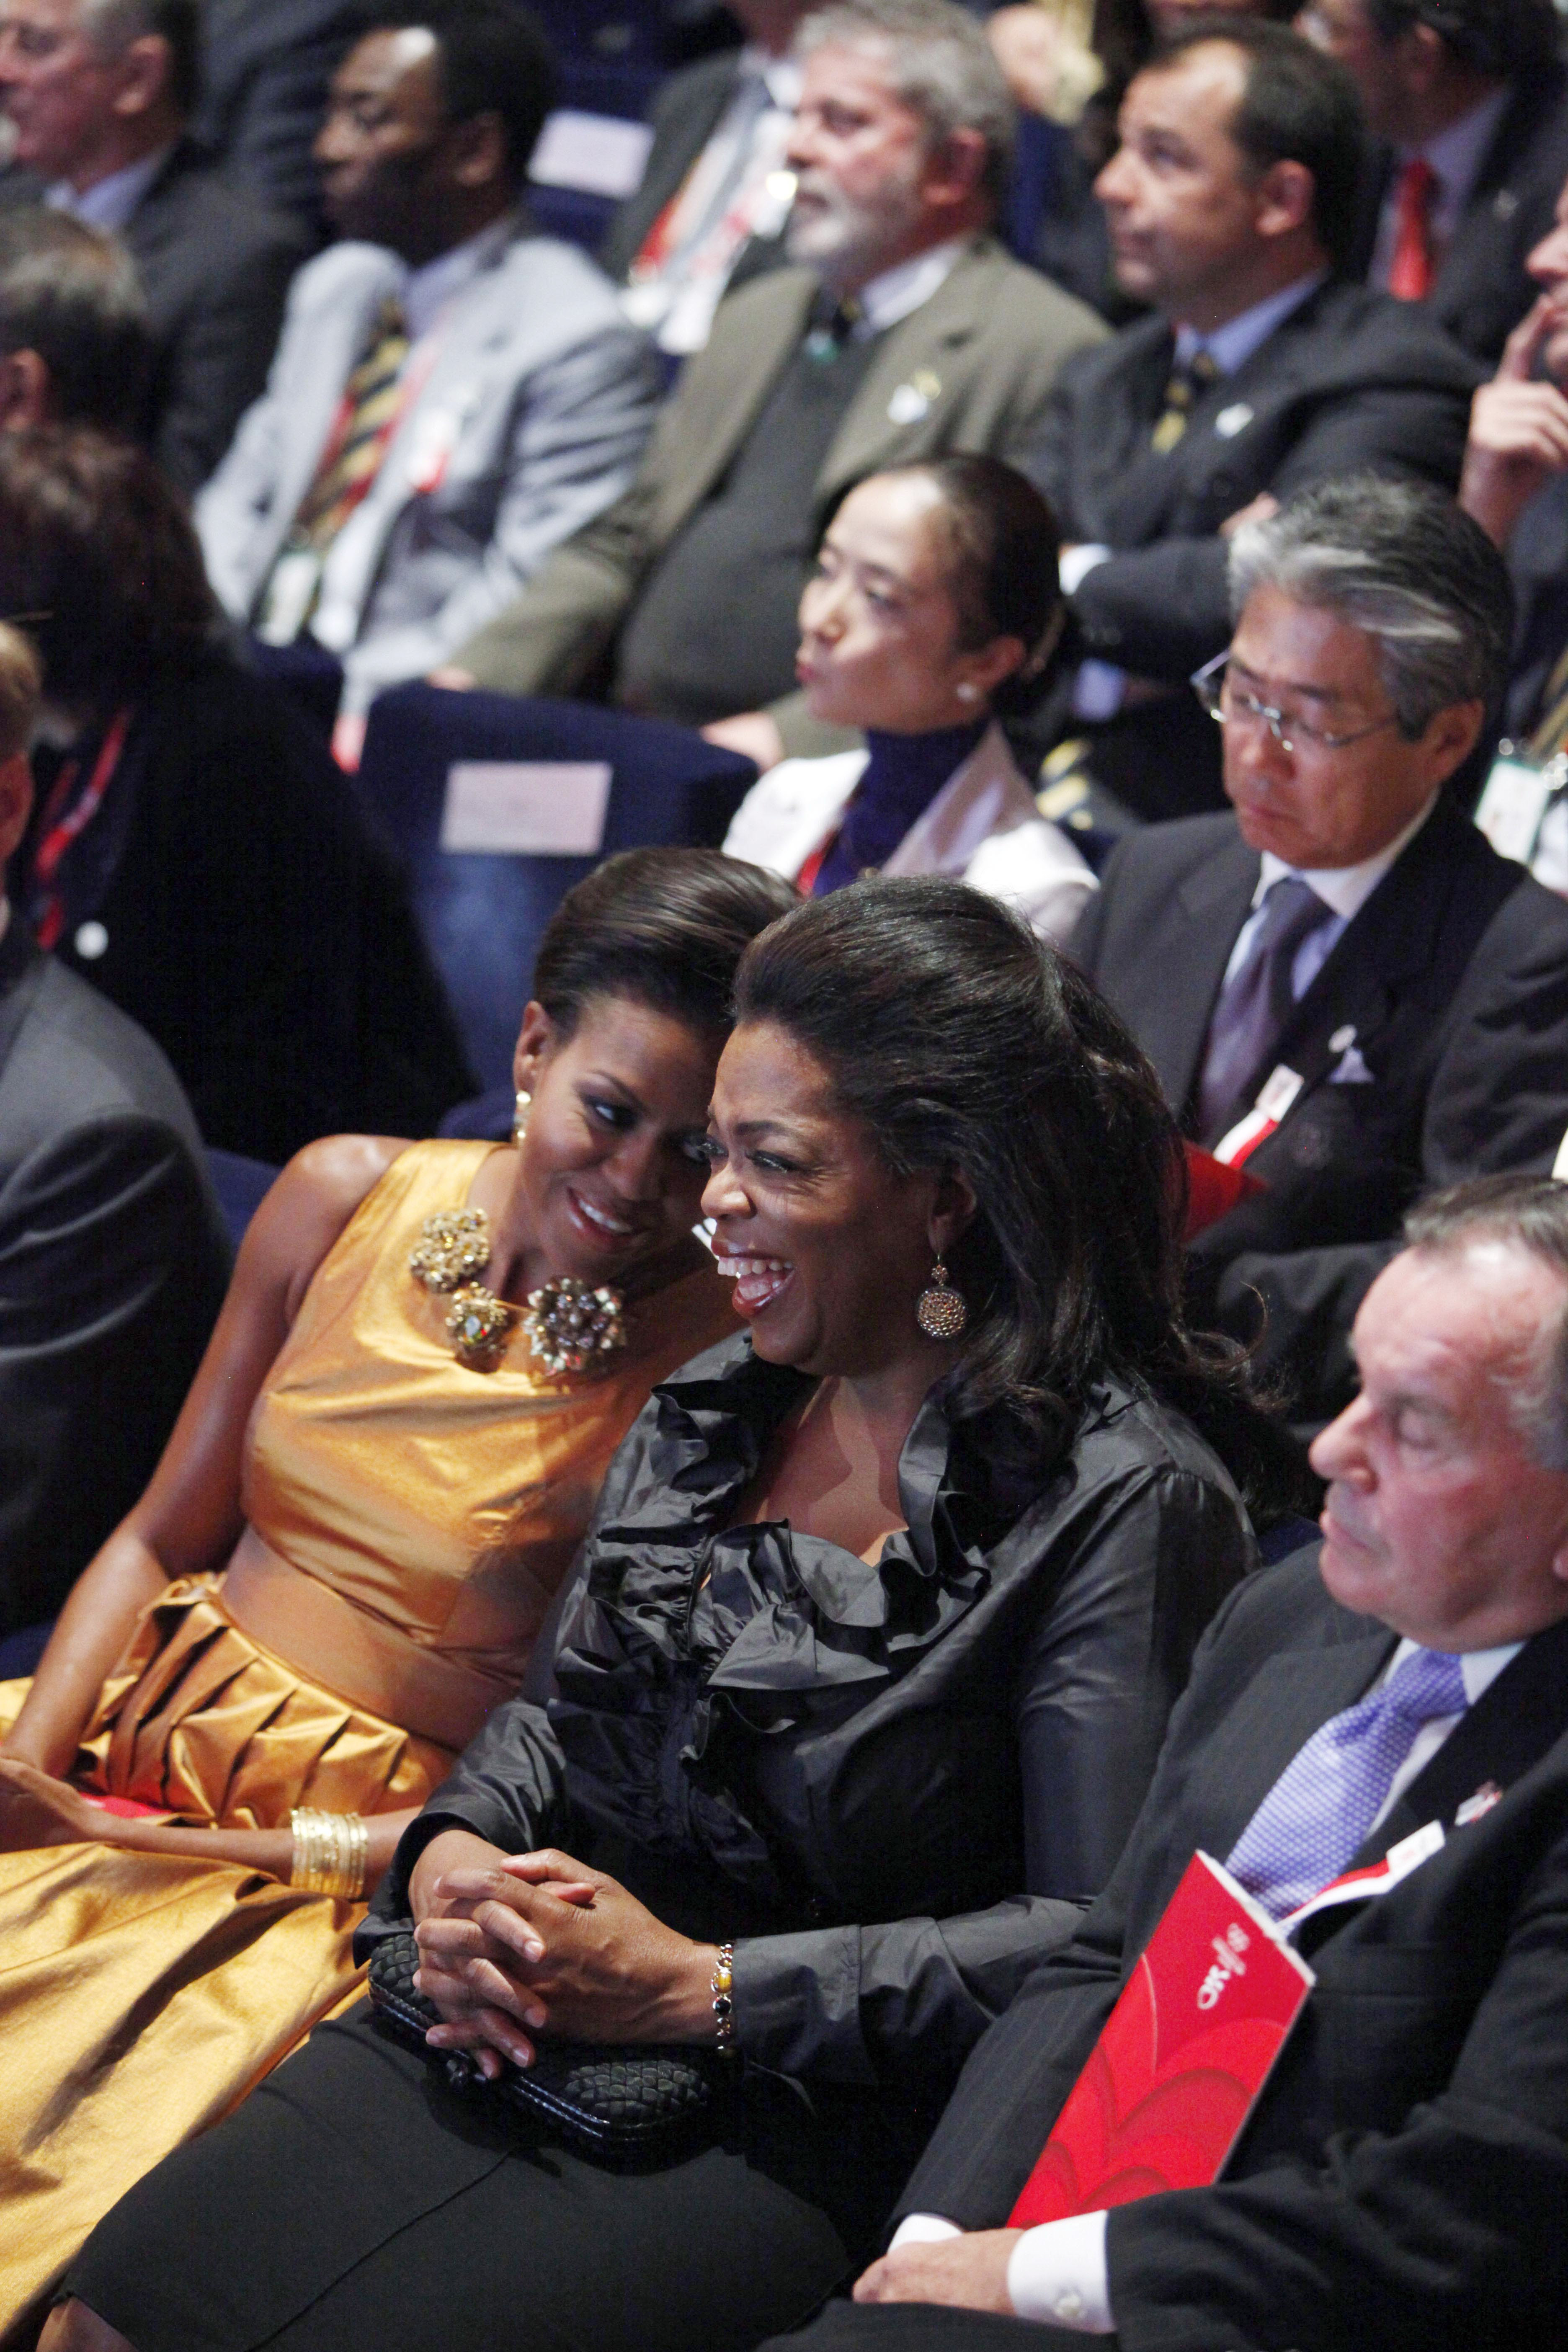 COPENHAGEN, DENMARK - OCTOBER 1:  U.S. first lady Michelle Obama sits with television talk show host Oprah Winfrey, second right, and Chicago Mayor Richard M. Daley, right, at the opening Ceremony of the 121st IOC Session at the Copenhagen Opera House on